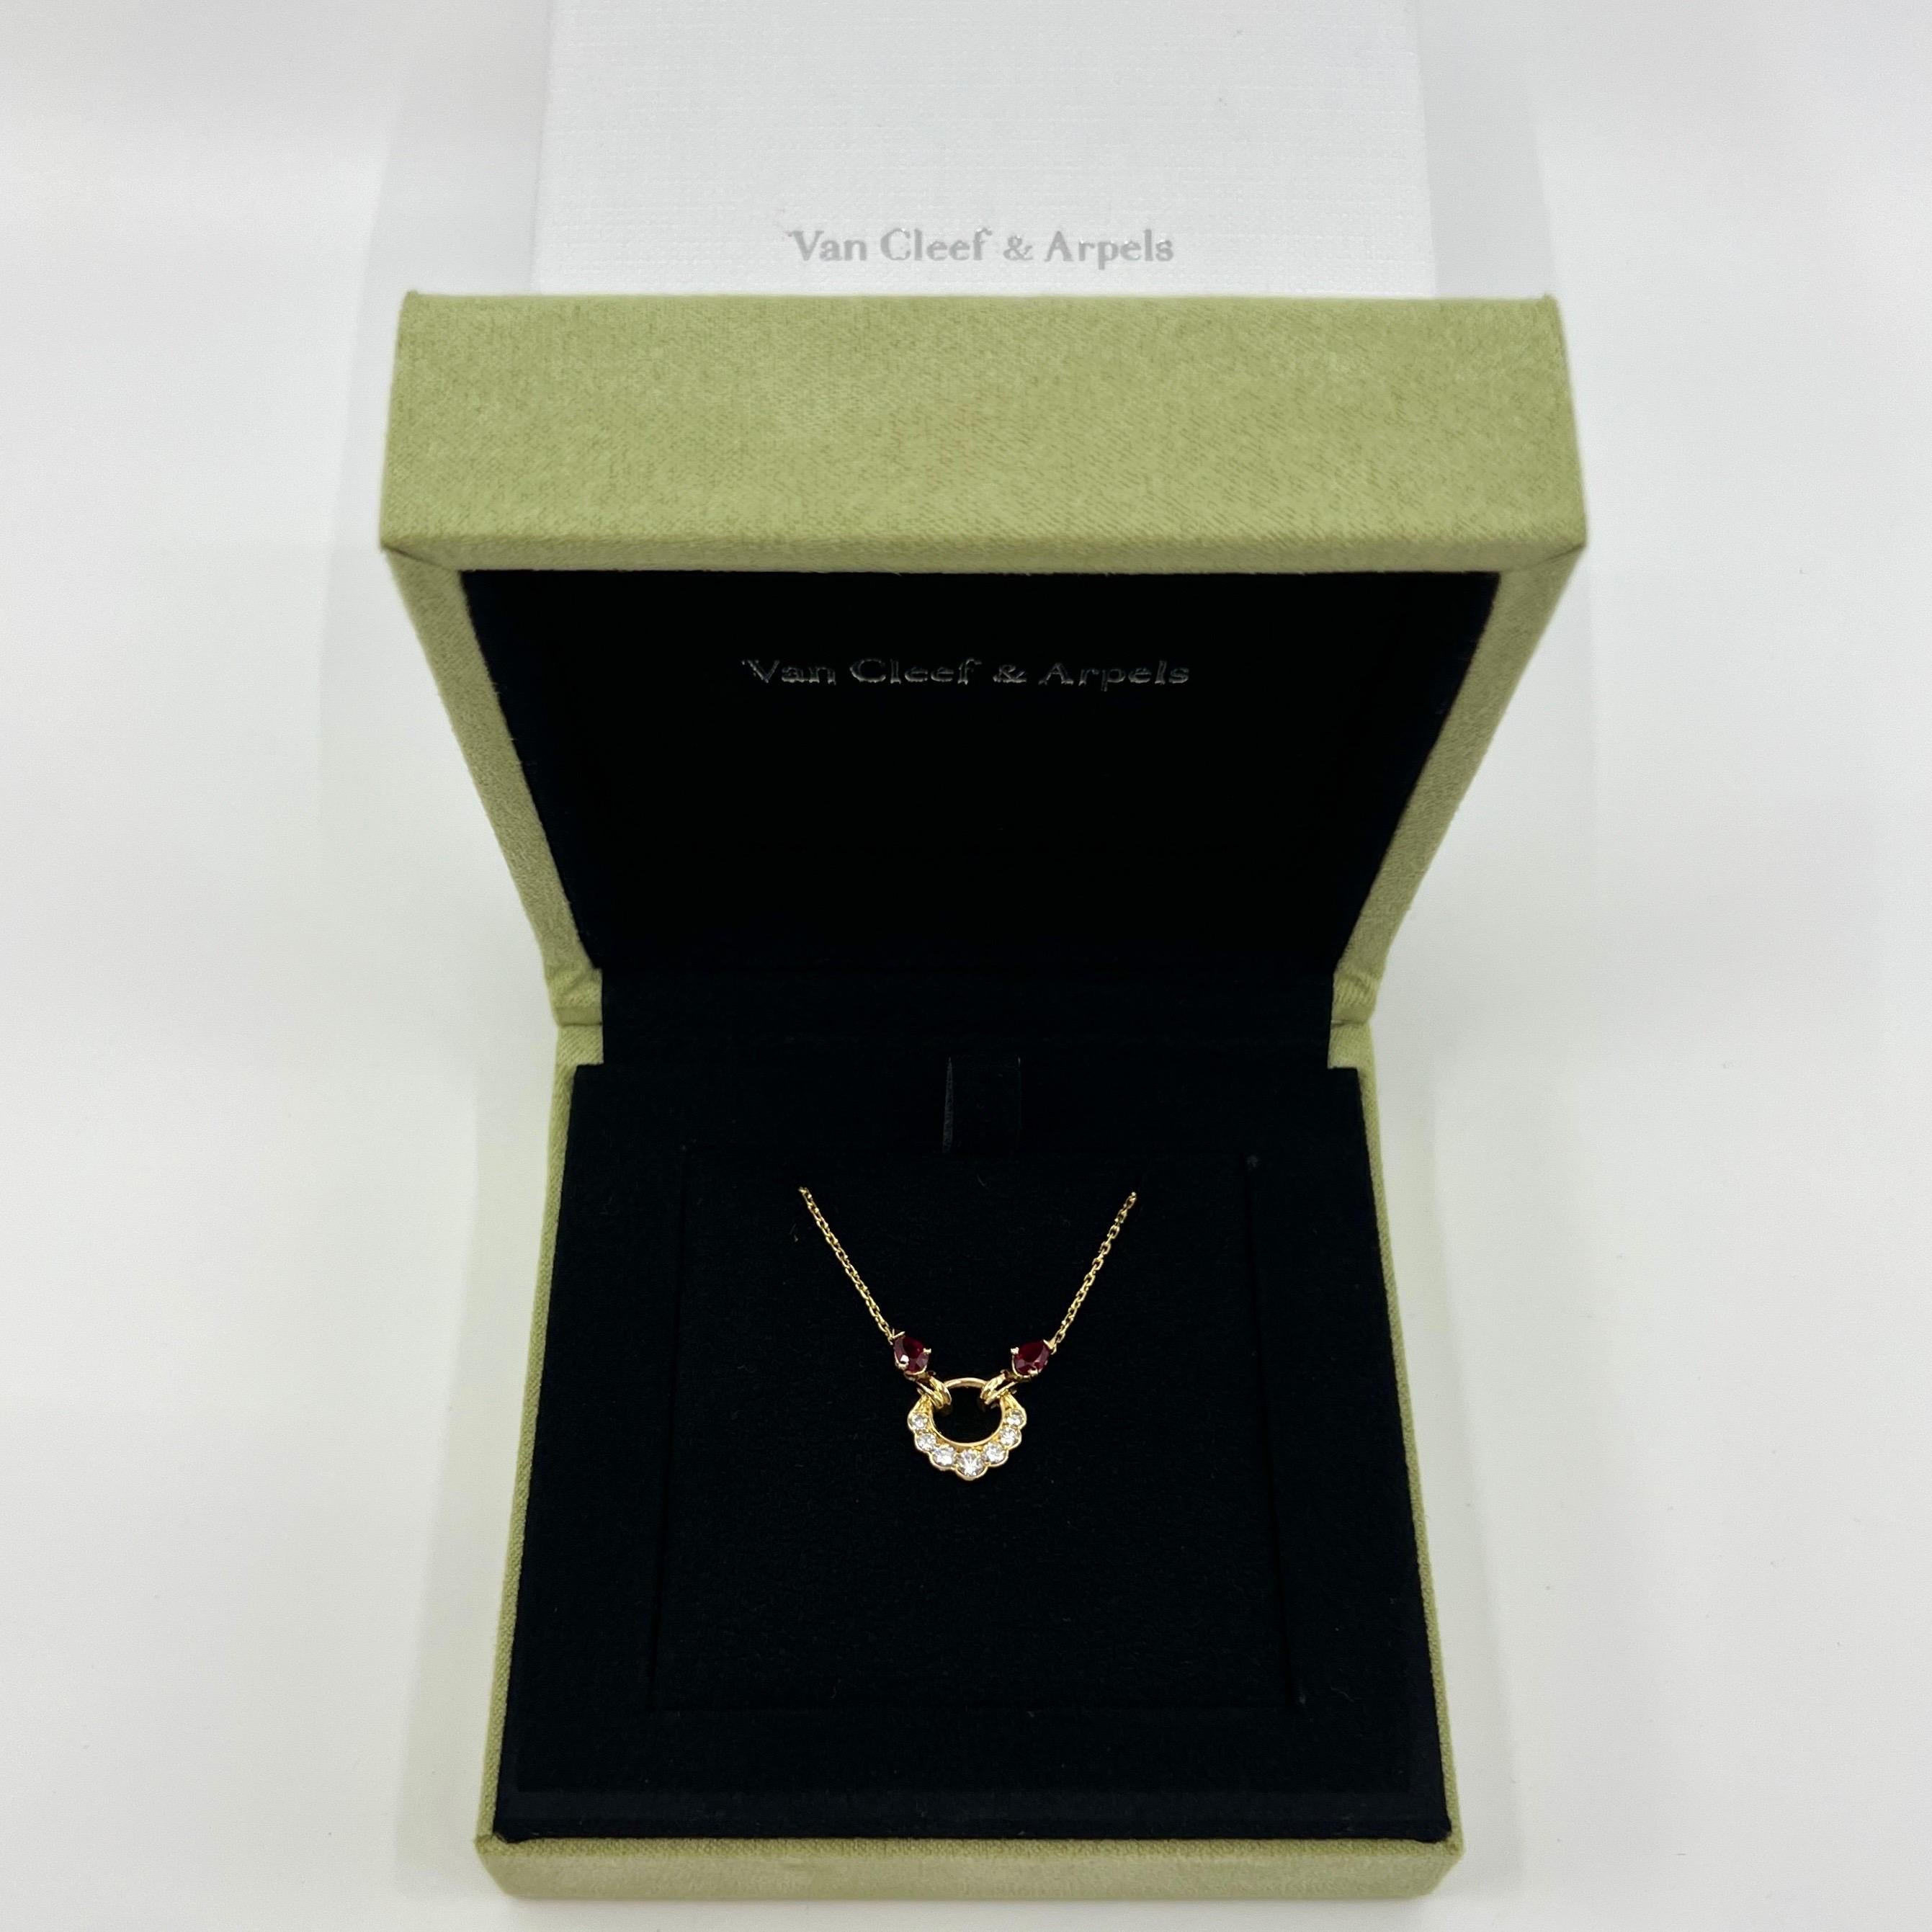 Round Cut Rare Vintage Van Cleef & Arpels Ruby Diamond 18k Yellow Gold Pendant Necklace For Sale